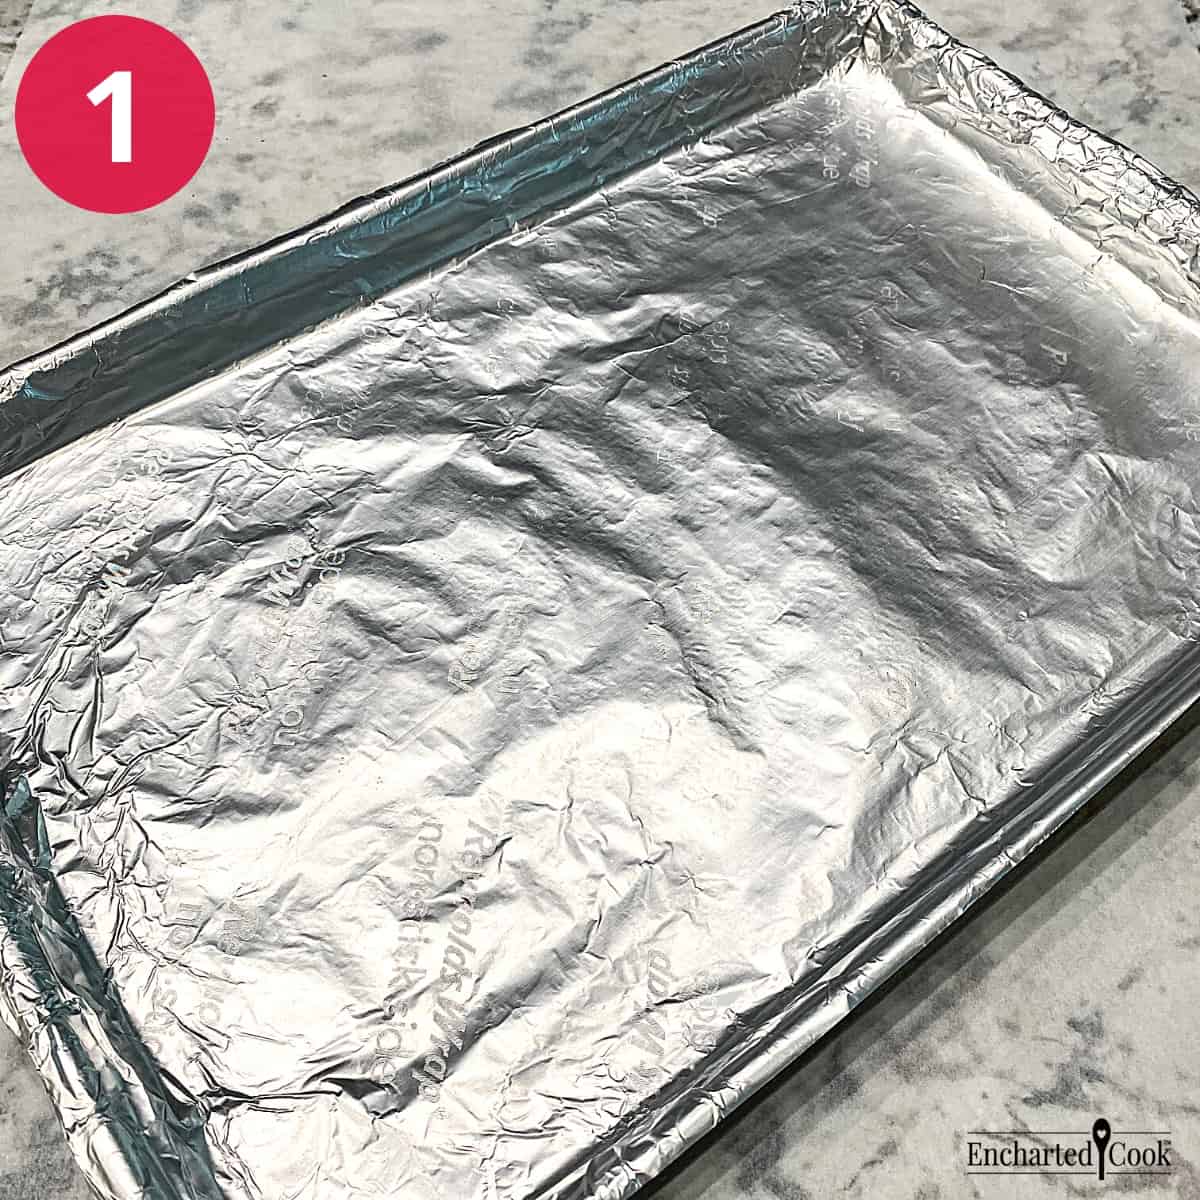 Process Photo 1 - A rimmed baking sheet is lined with aluminum foil.